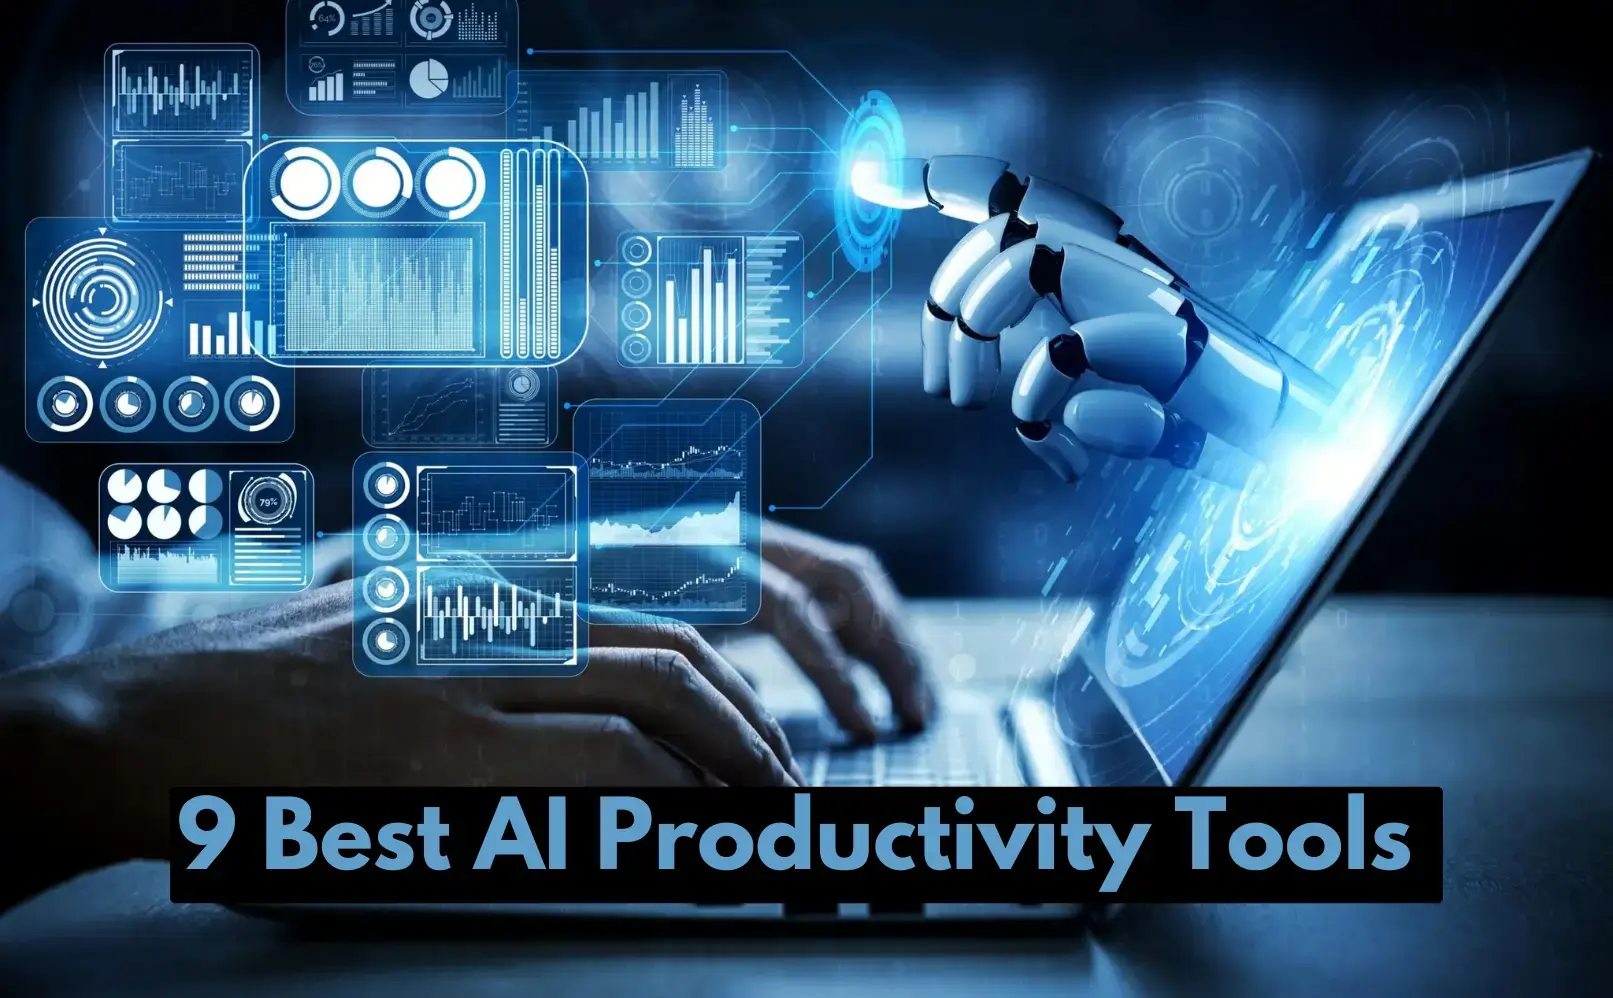 Discover the Best AI productivity tools to get more done in less time. Learn how smart you can automate tasks and optimize workflows.